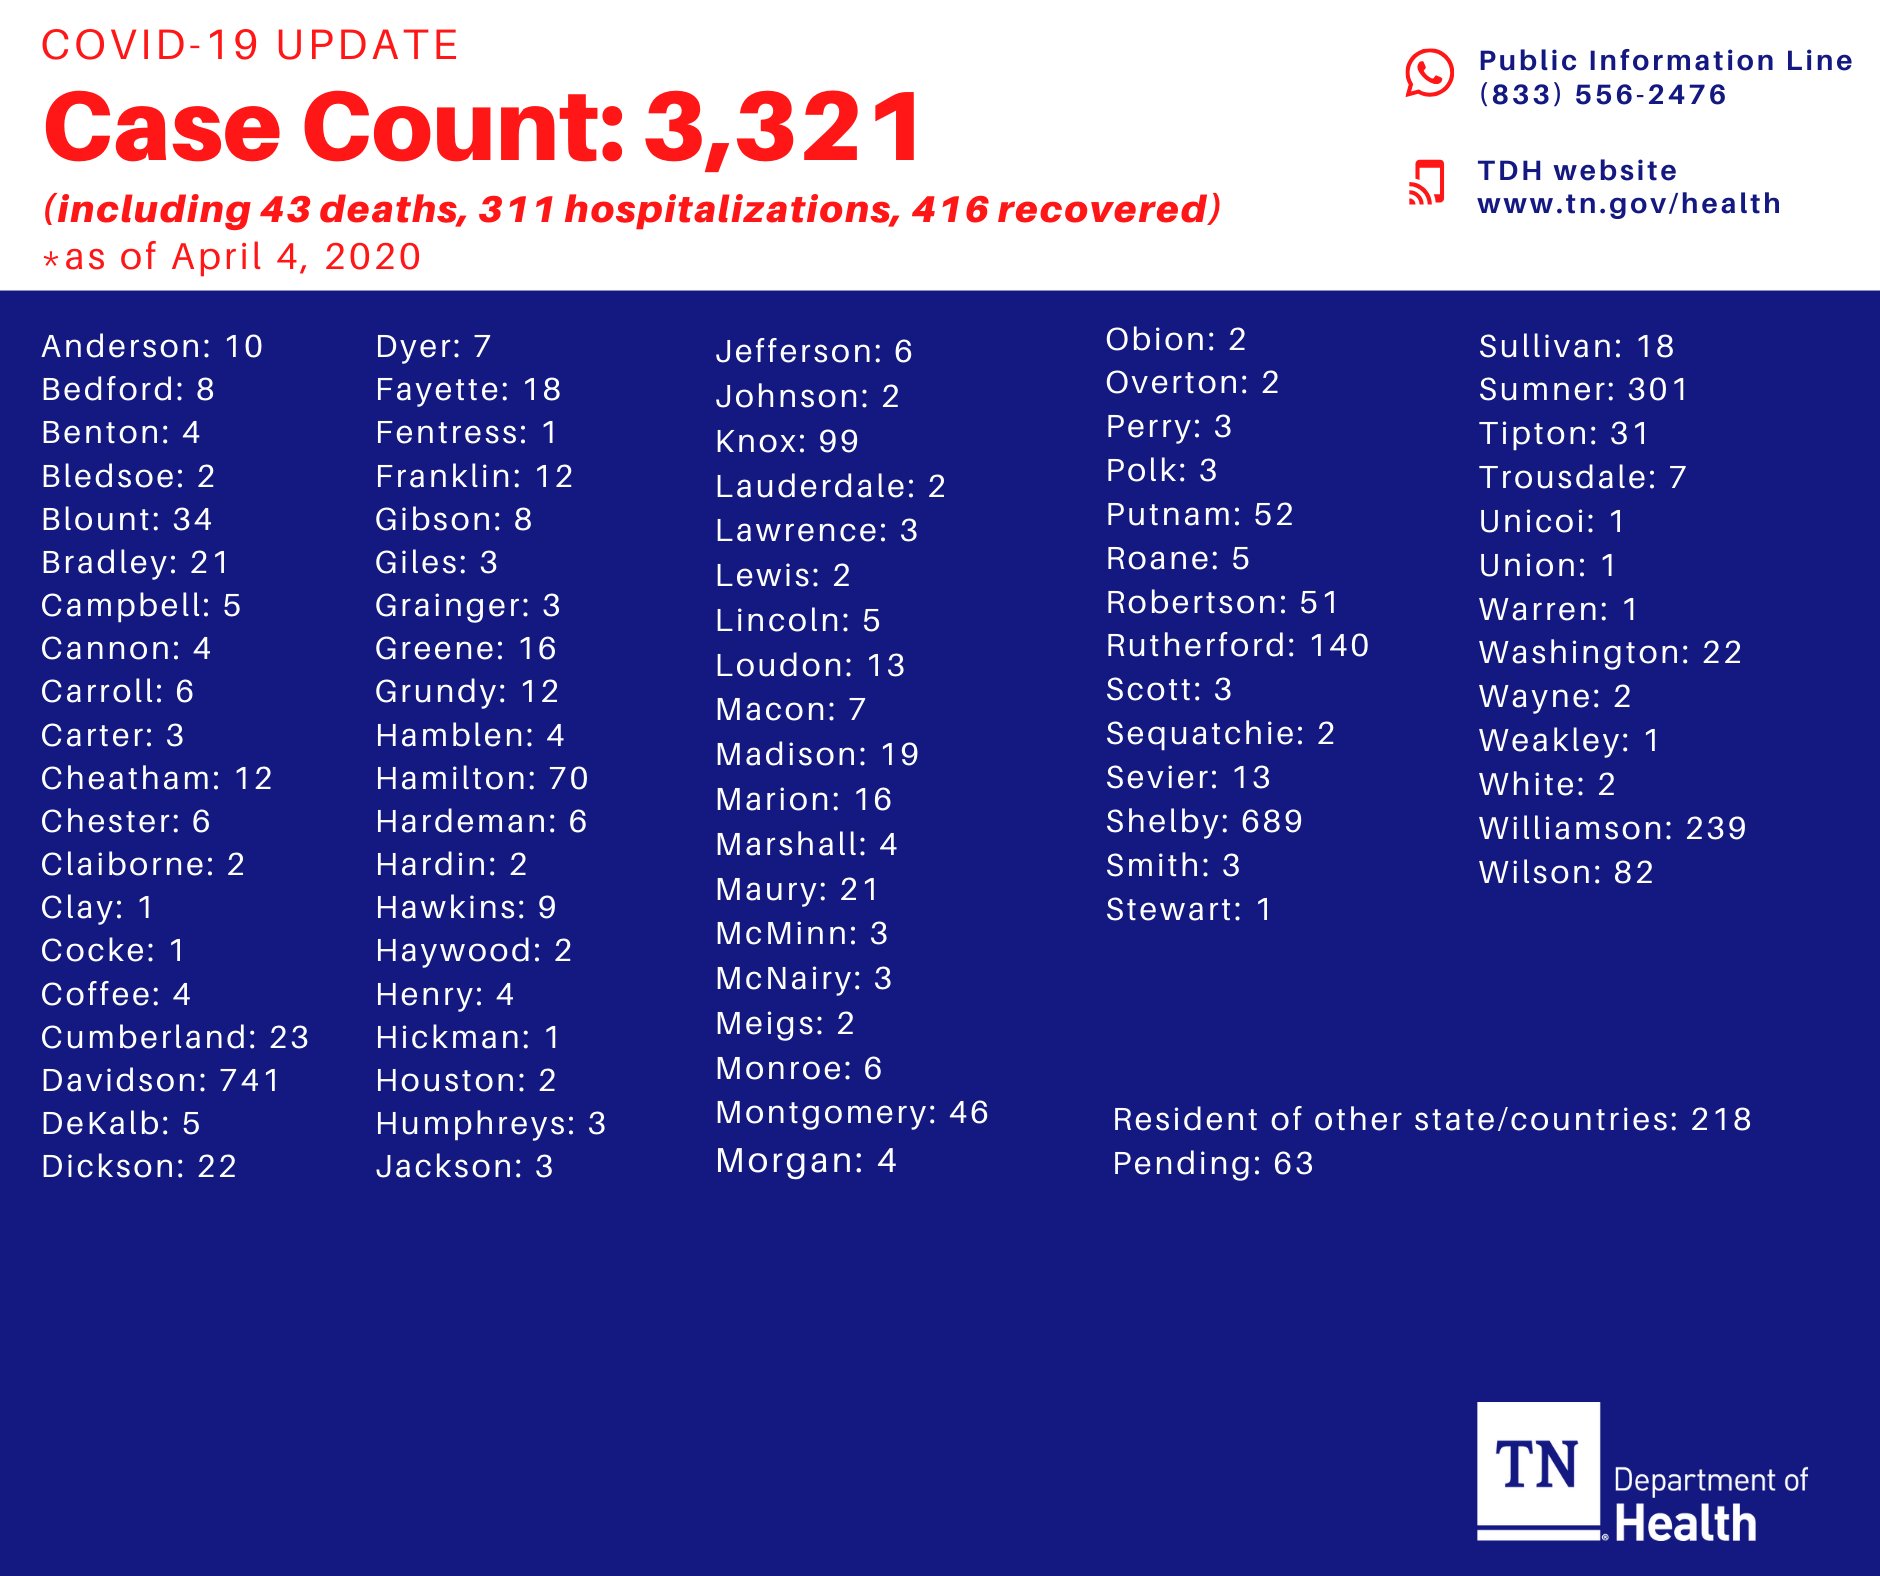 Tn Dept Of Health On Twitter The Covid-19 Case Count For Tennessee Is Now 3321 As Of April 4 2020 Including 43 Deaths 311 Hospitalizations And 416 Recovered Questions Call 833 556-2476